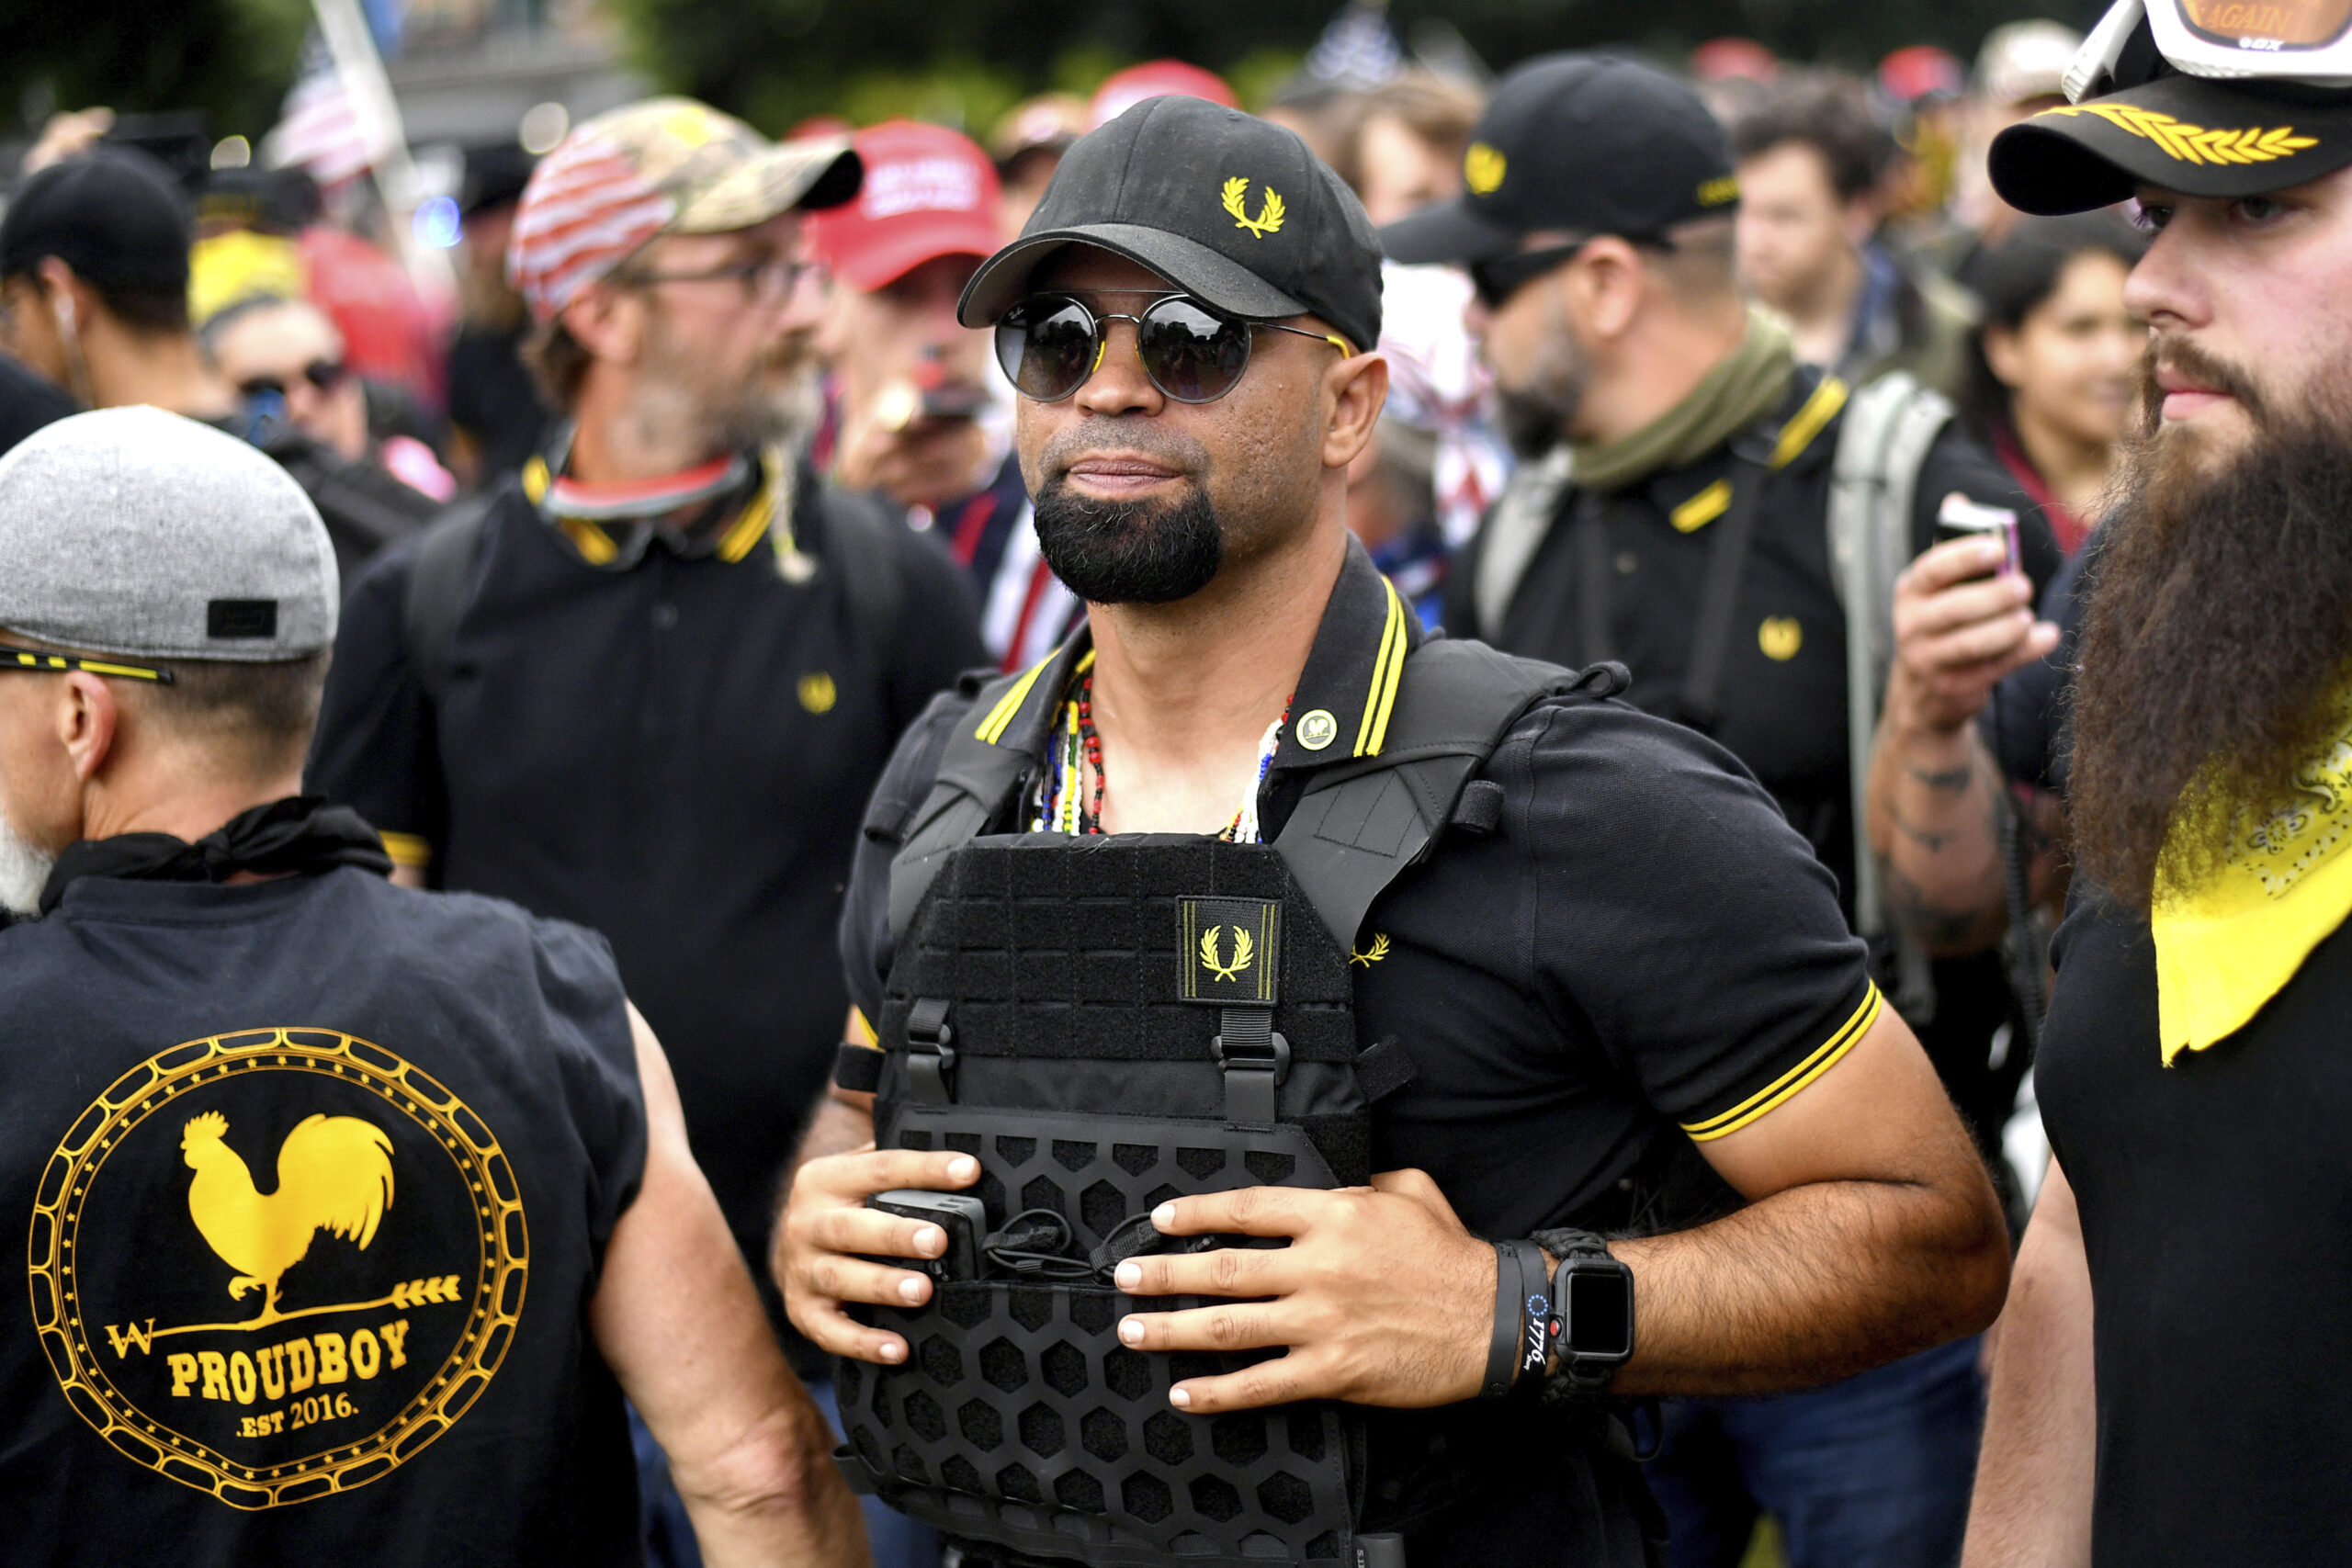 ‘Hateful & Overtly Racist’: Judge Orders Proud Boys To Pay Over $1 Million For Vandalizing Black Lives Matter Sign